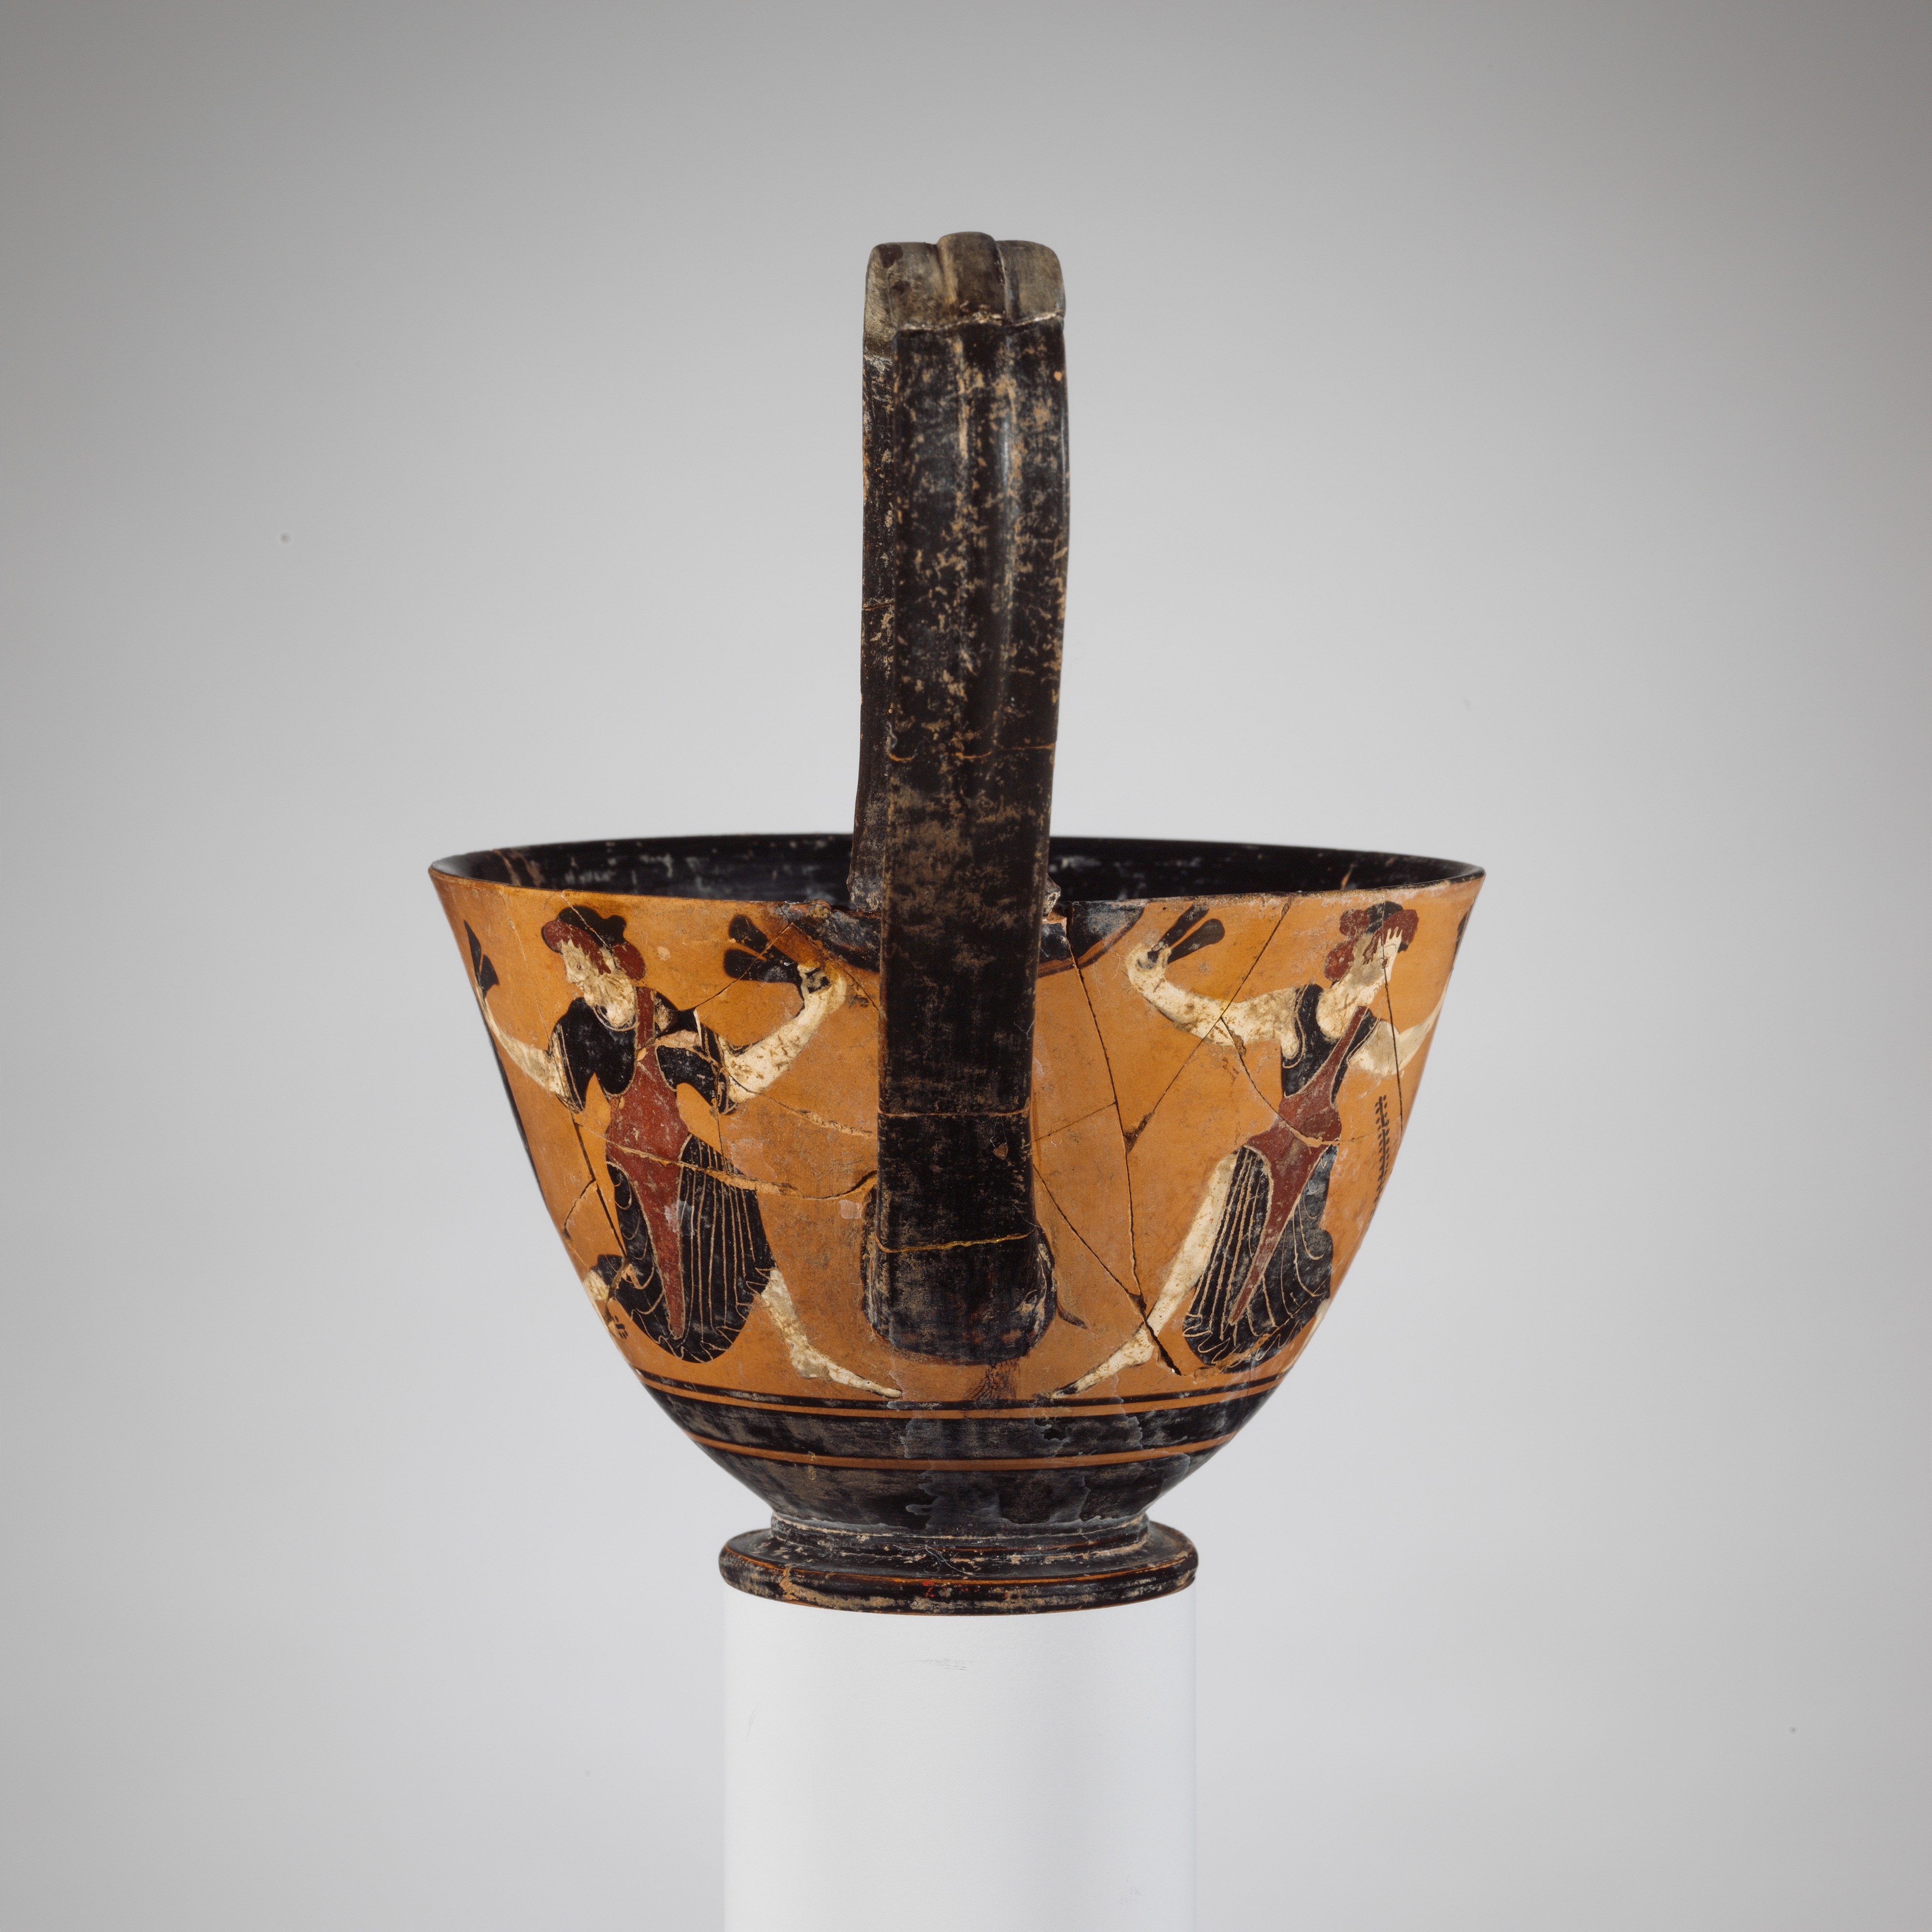 Attributed to the Group of Vatican G.57, Terracotta kyathos (cup-shaped  ladle), Greek, Attic, Archaic